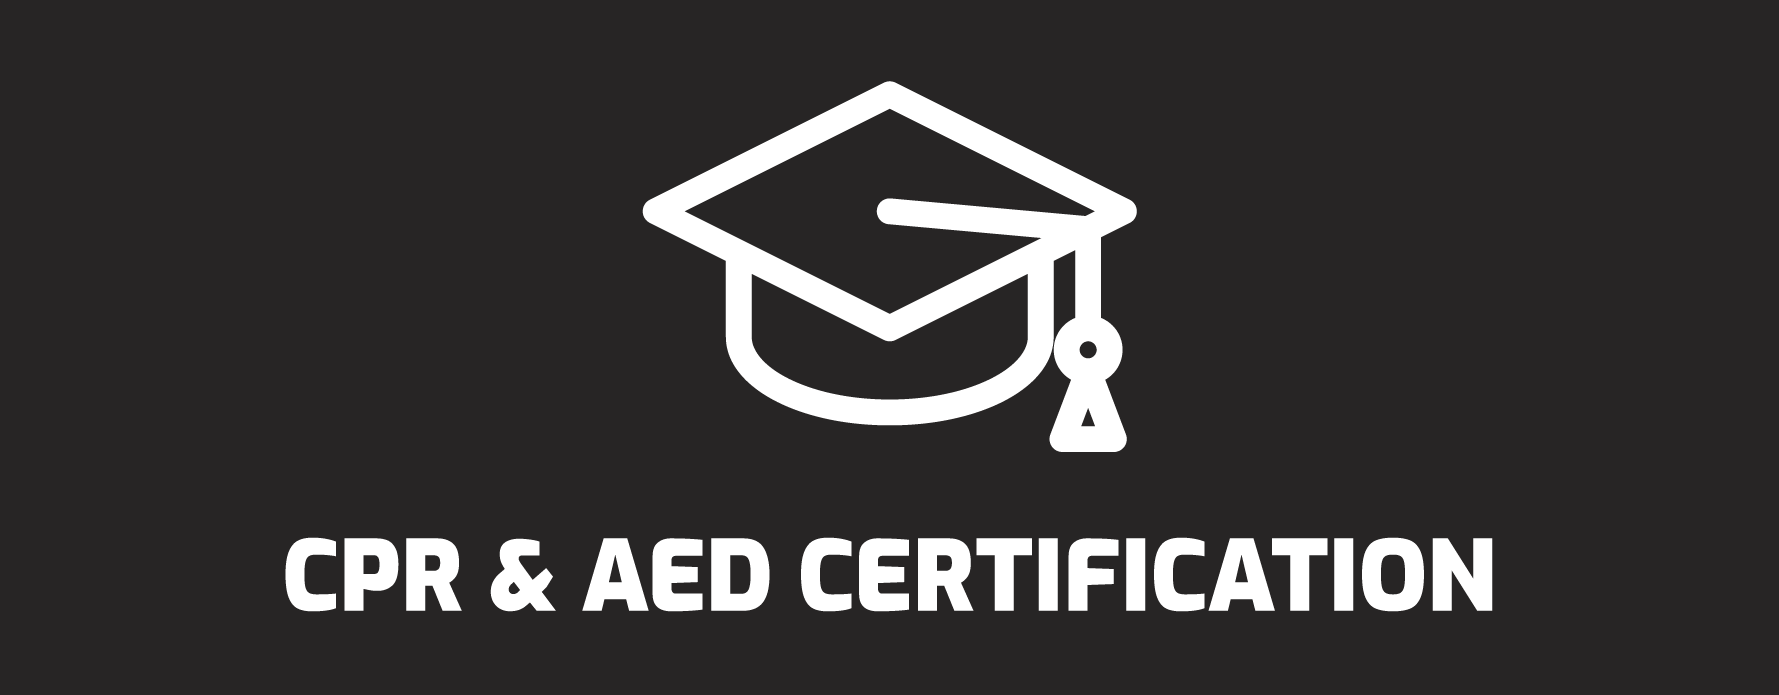 CPR & AED Certification